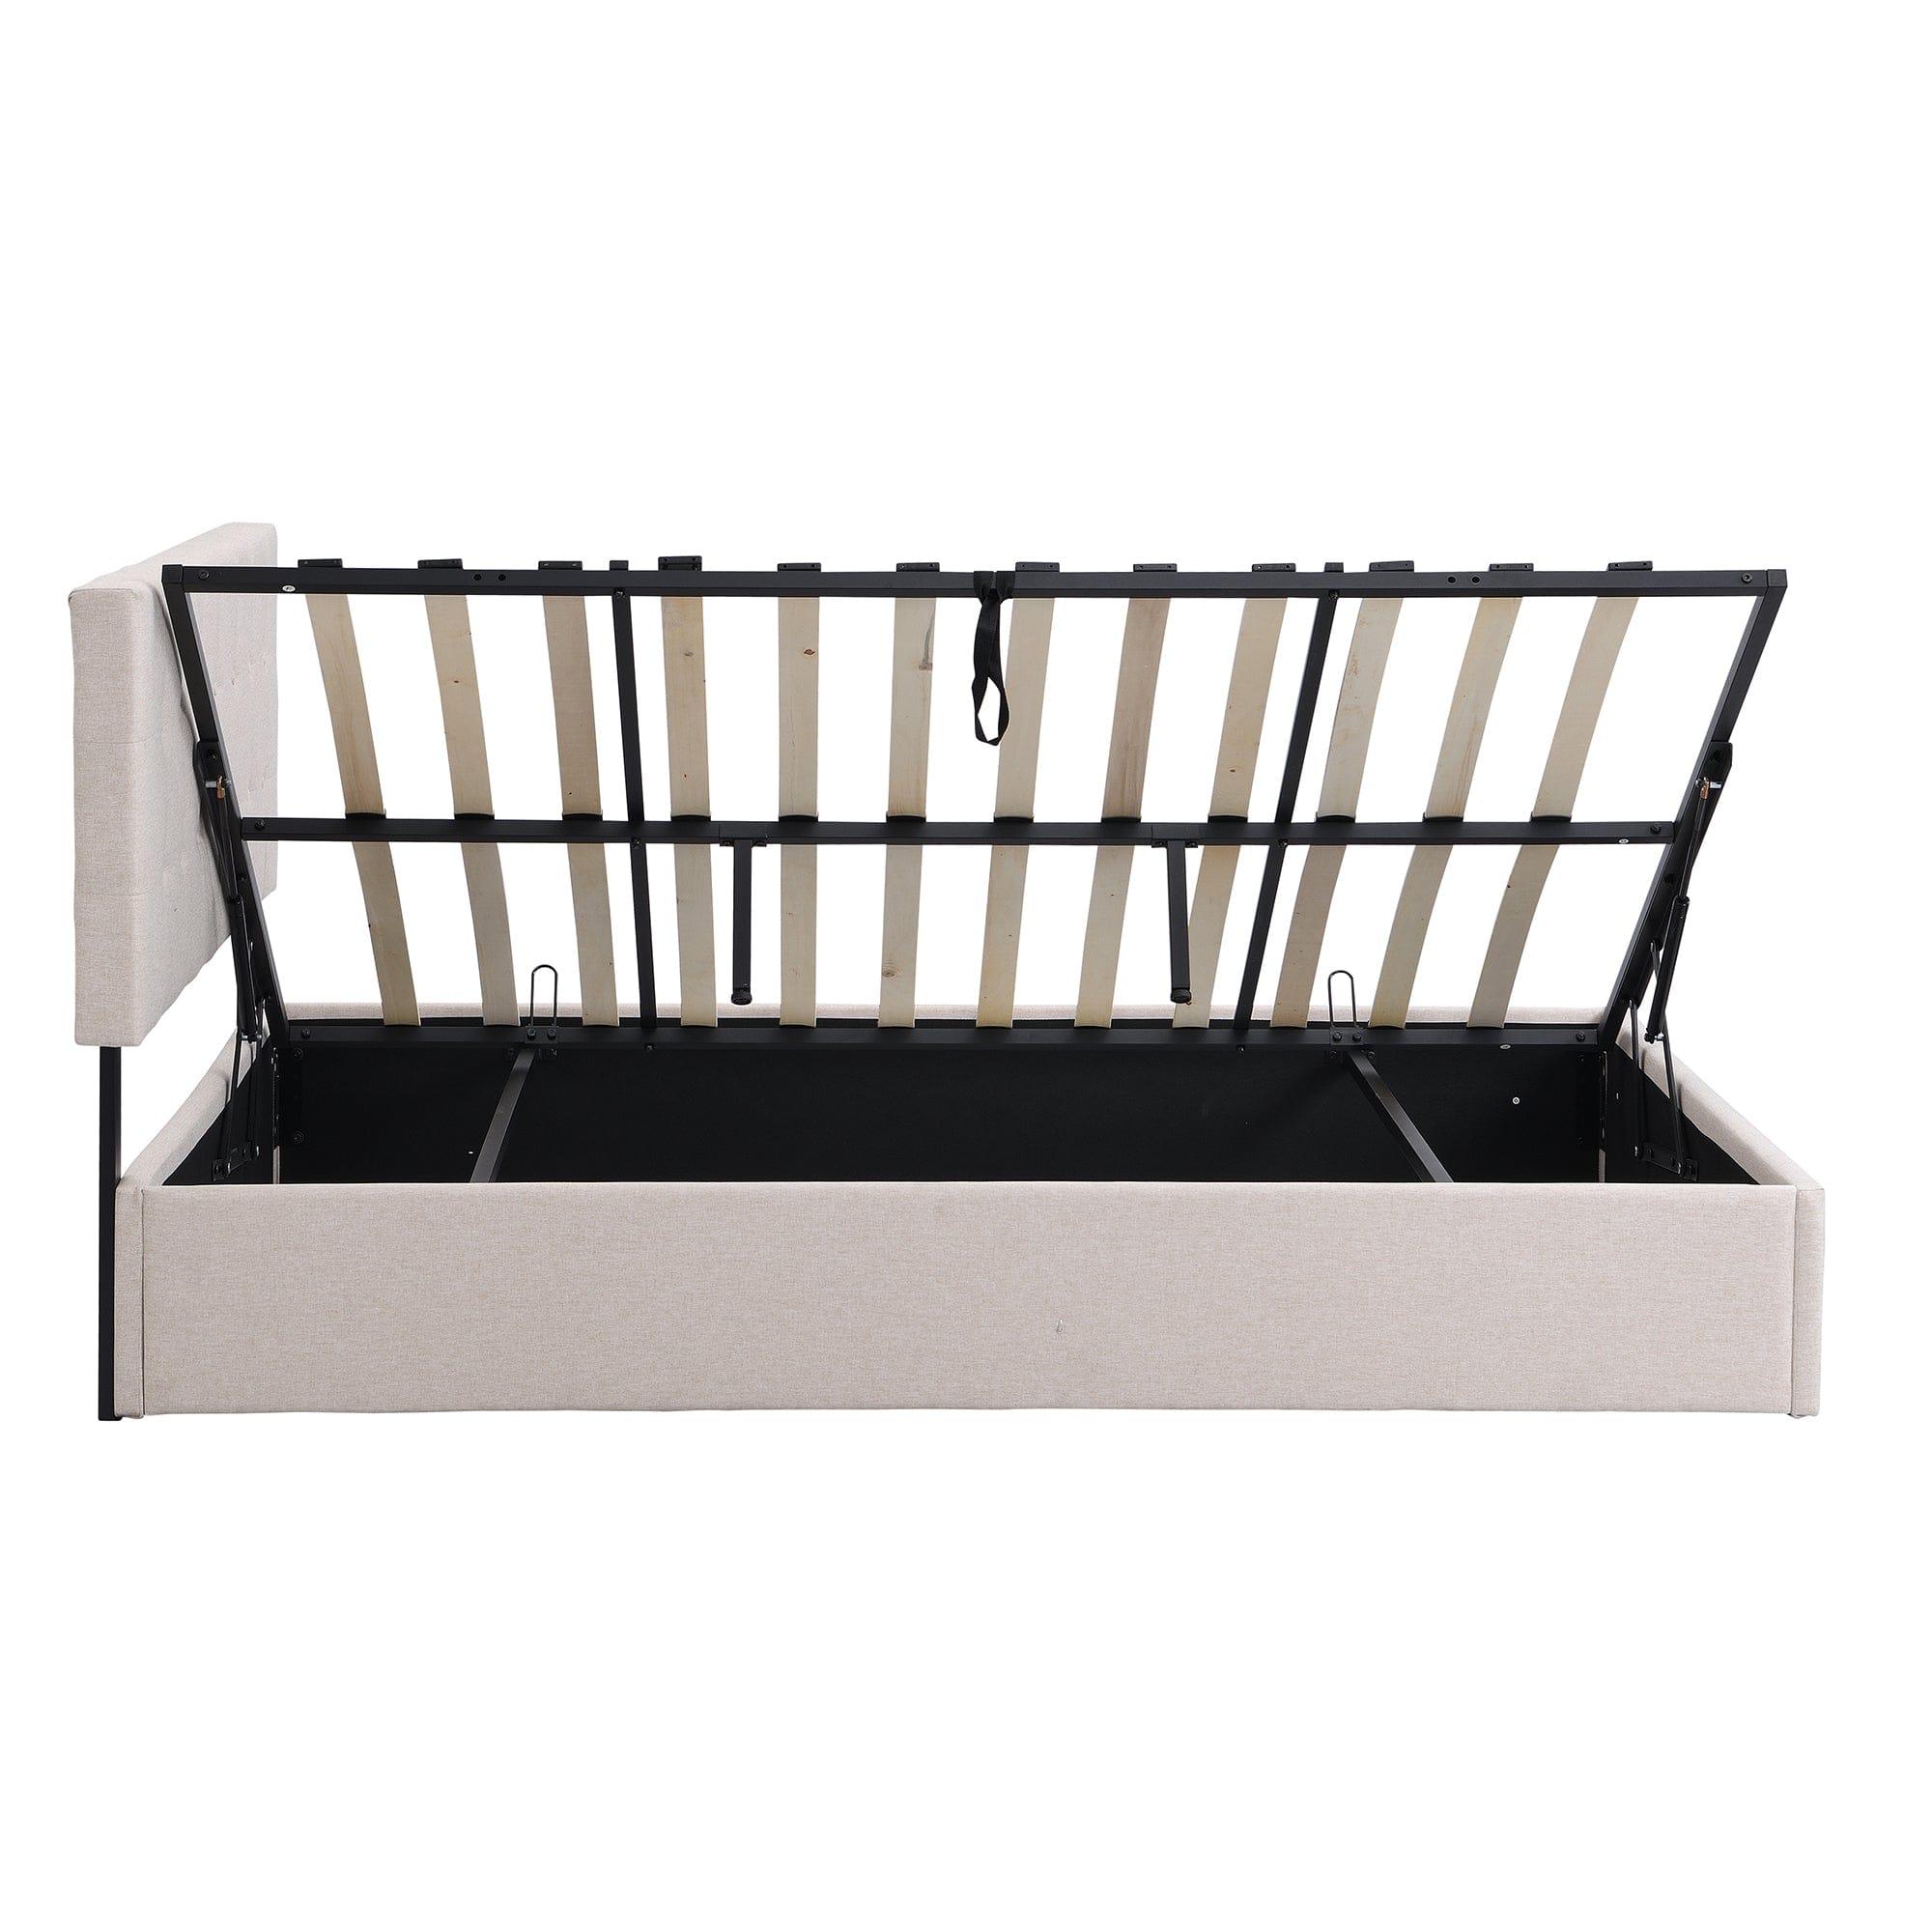 Shop Queen Size Upholstered Platform Bed with Underneath Storage Space,Beige Mademoiselle Home Decor